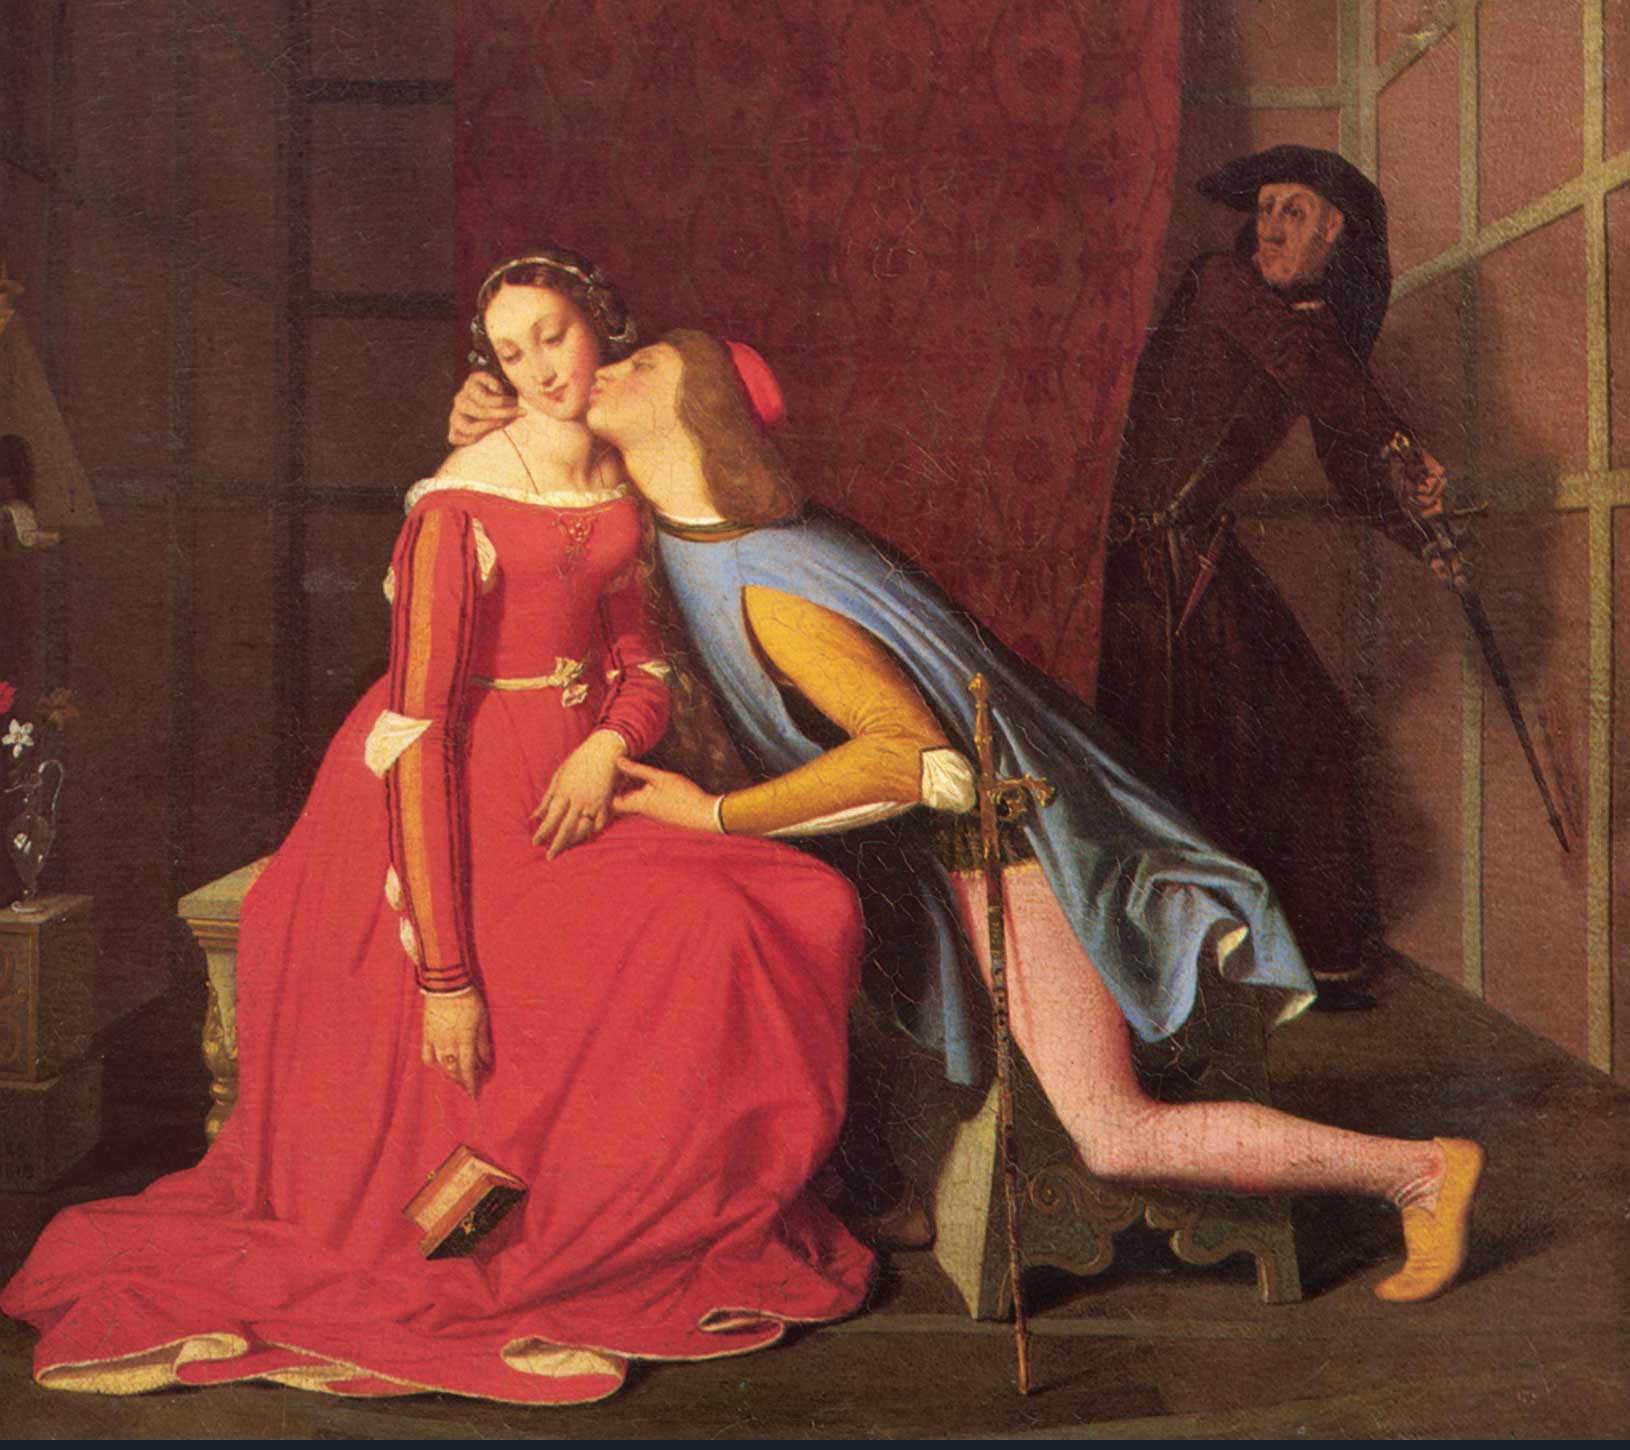 A young man kisses a woman while her husband lurks in the shadows with a sword